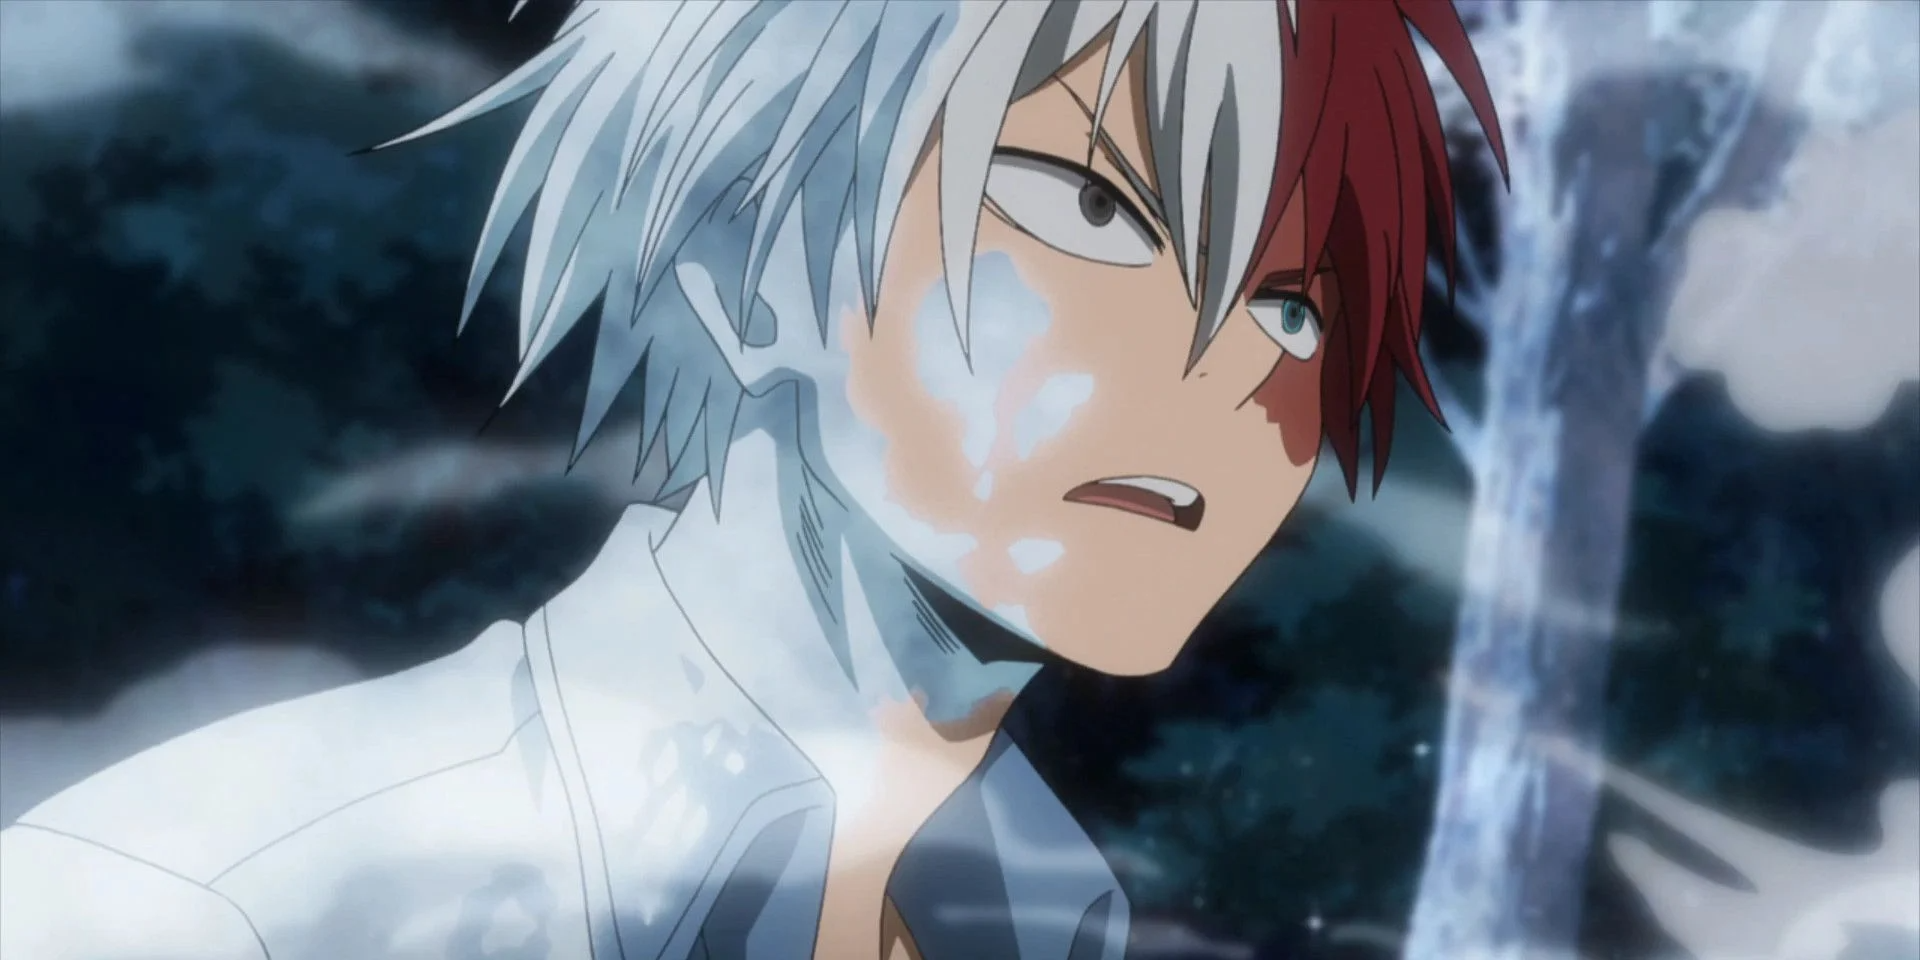 Why does Shoto Todoroki have ice on his face?